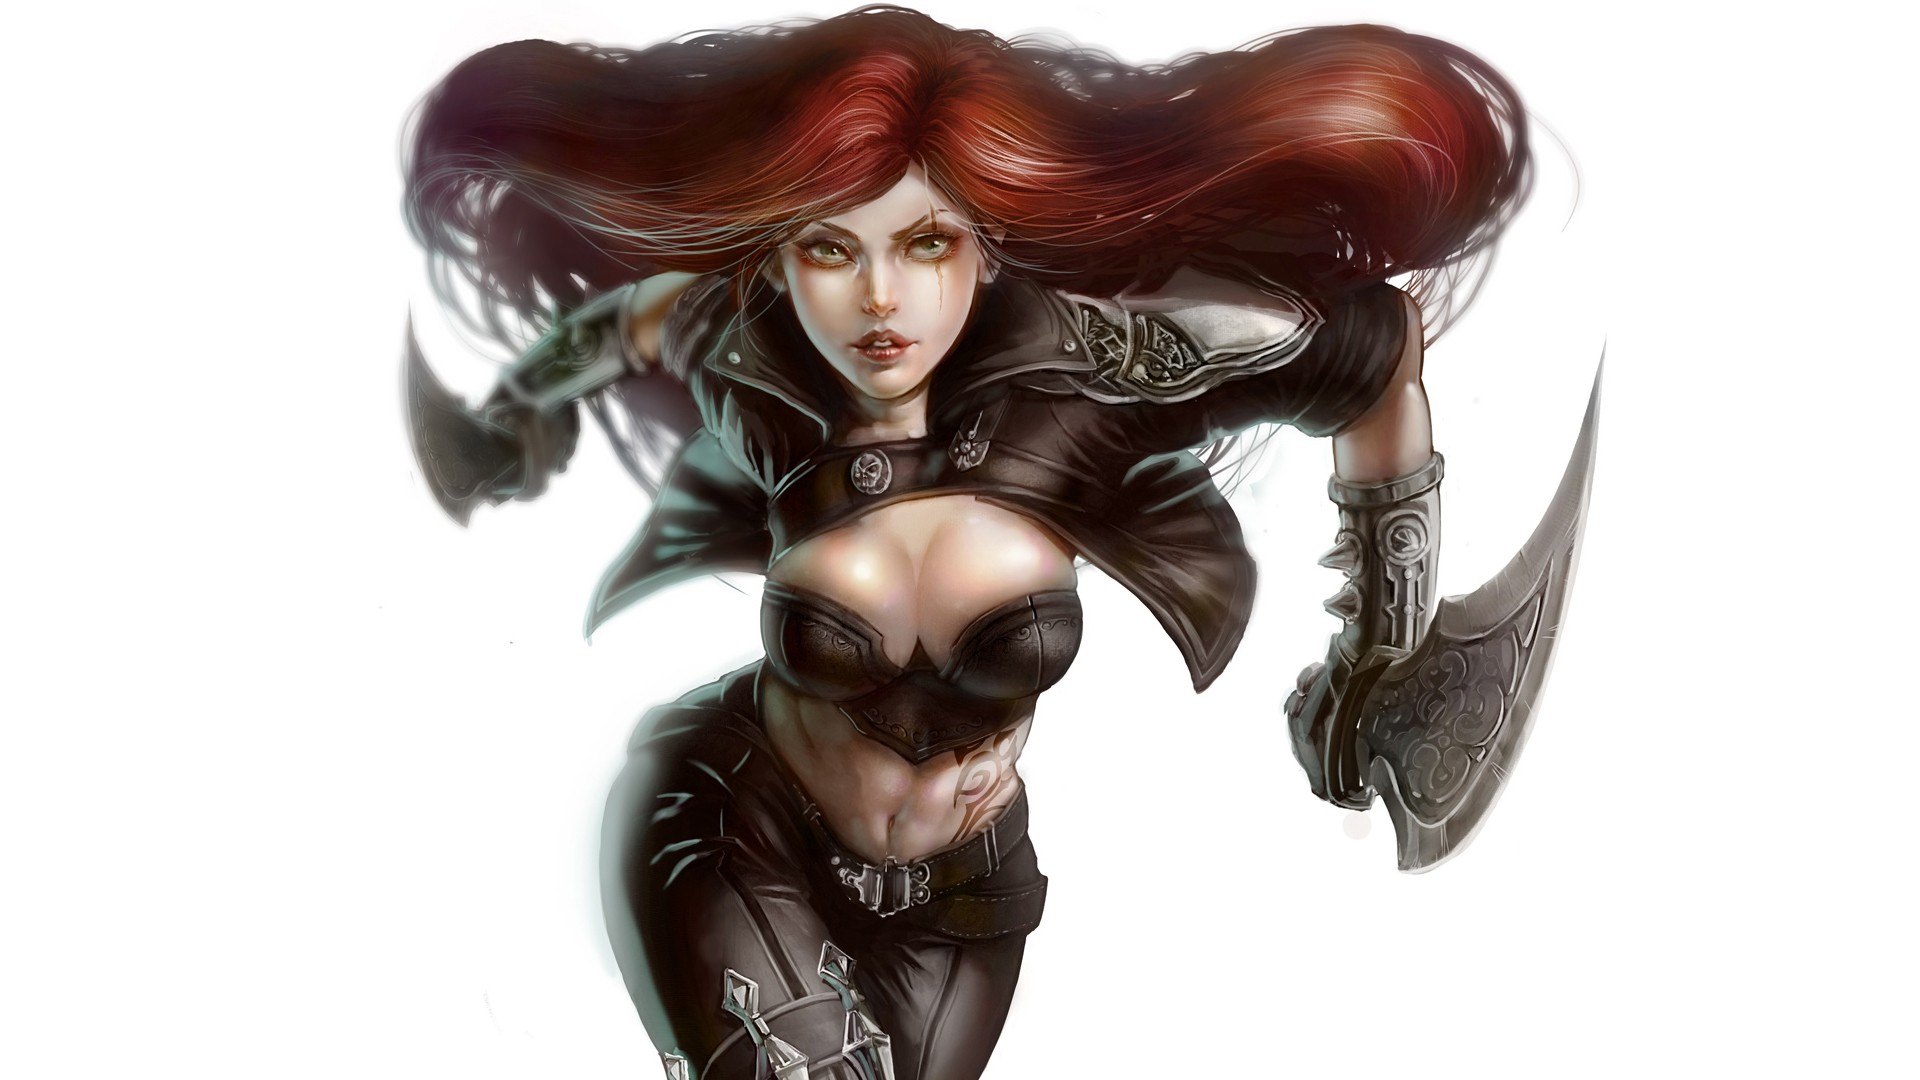 General 1920x1080 League of Legends video games boobs big boobs Katarina (League of Legends) redhead women video game art video game girls simple background white background red lipstick lipstick belly inked girls PC gaming